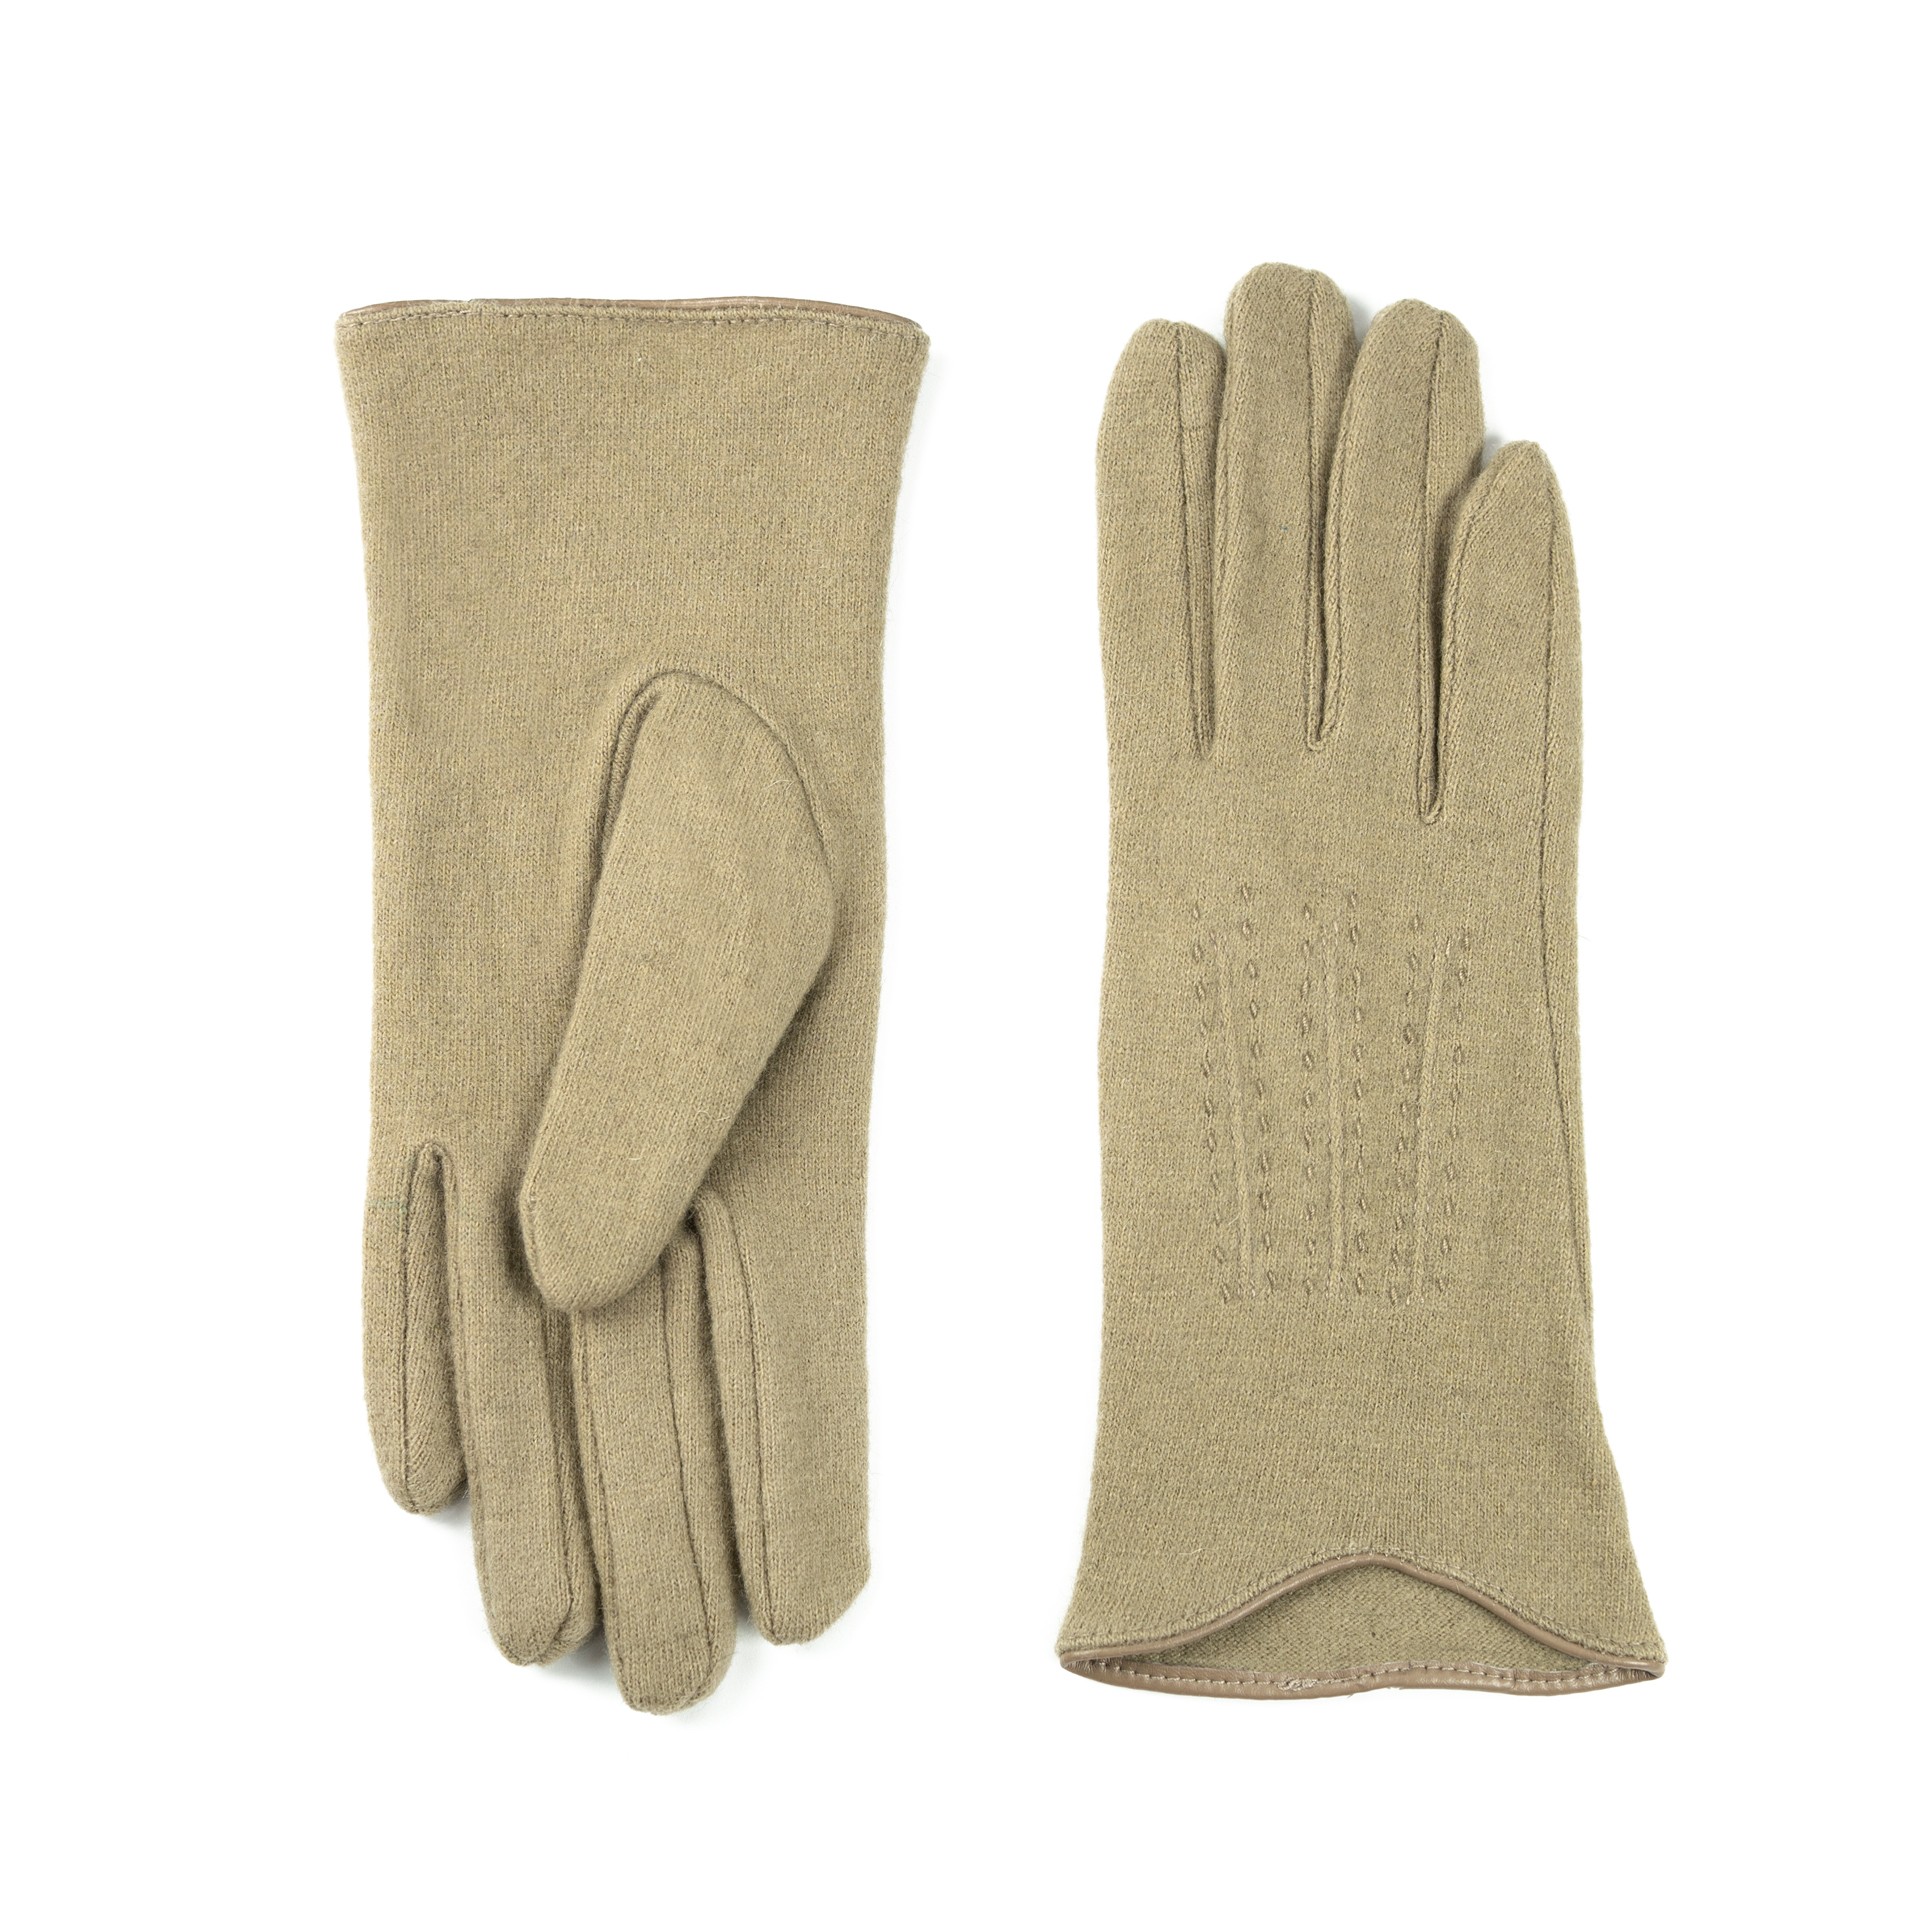 Art Of Polo Woman's Gloves Rk19289